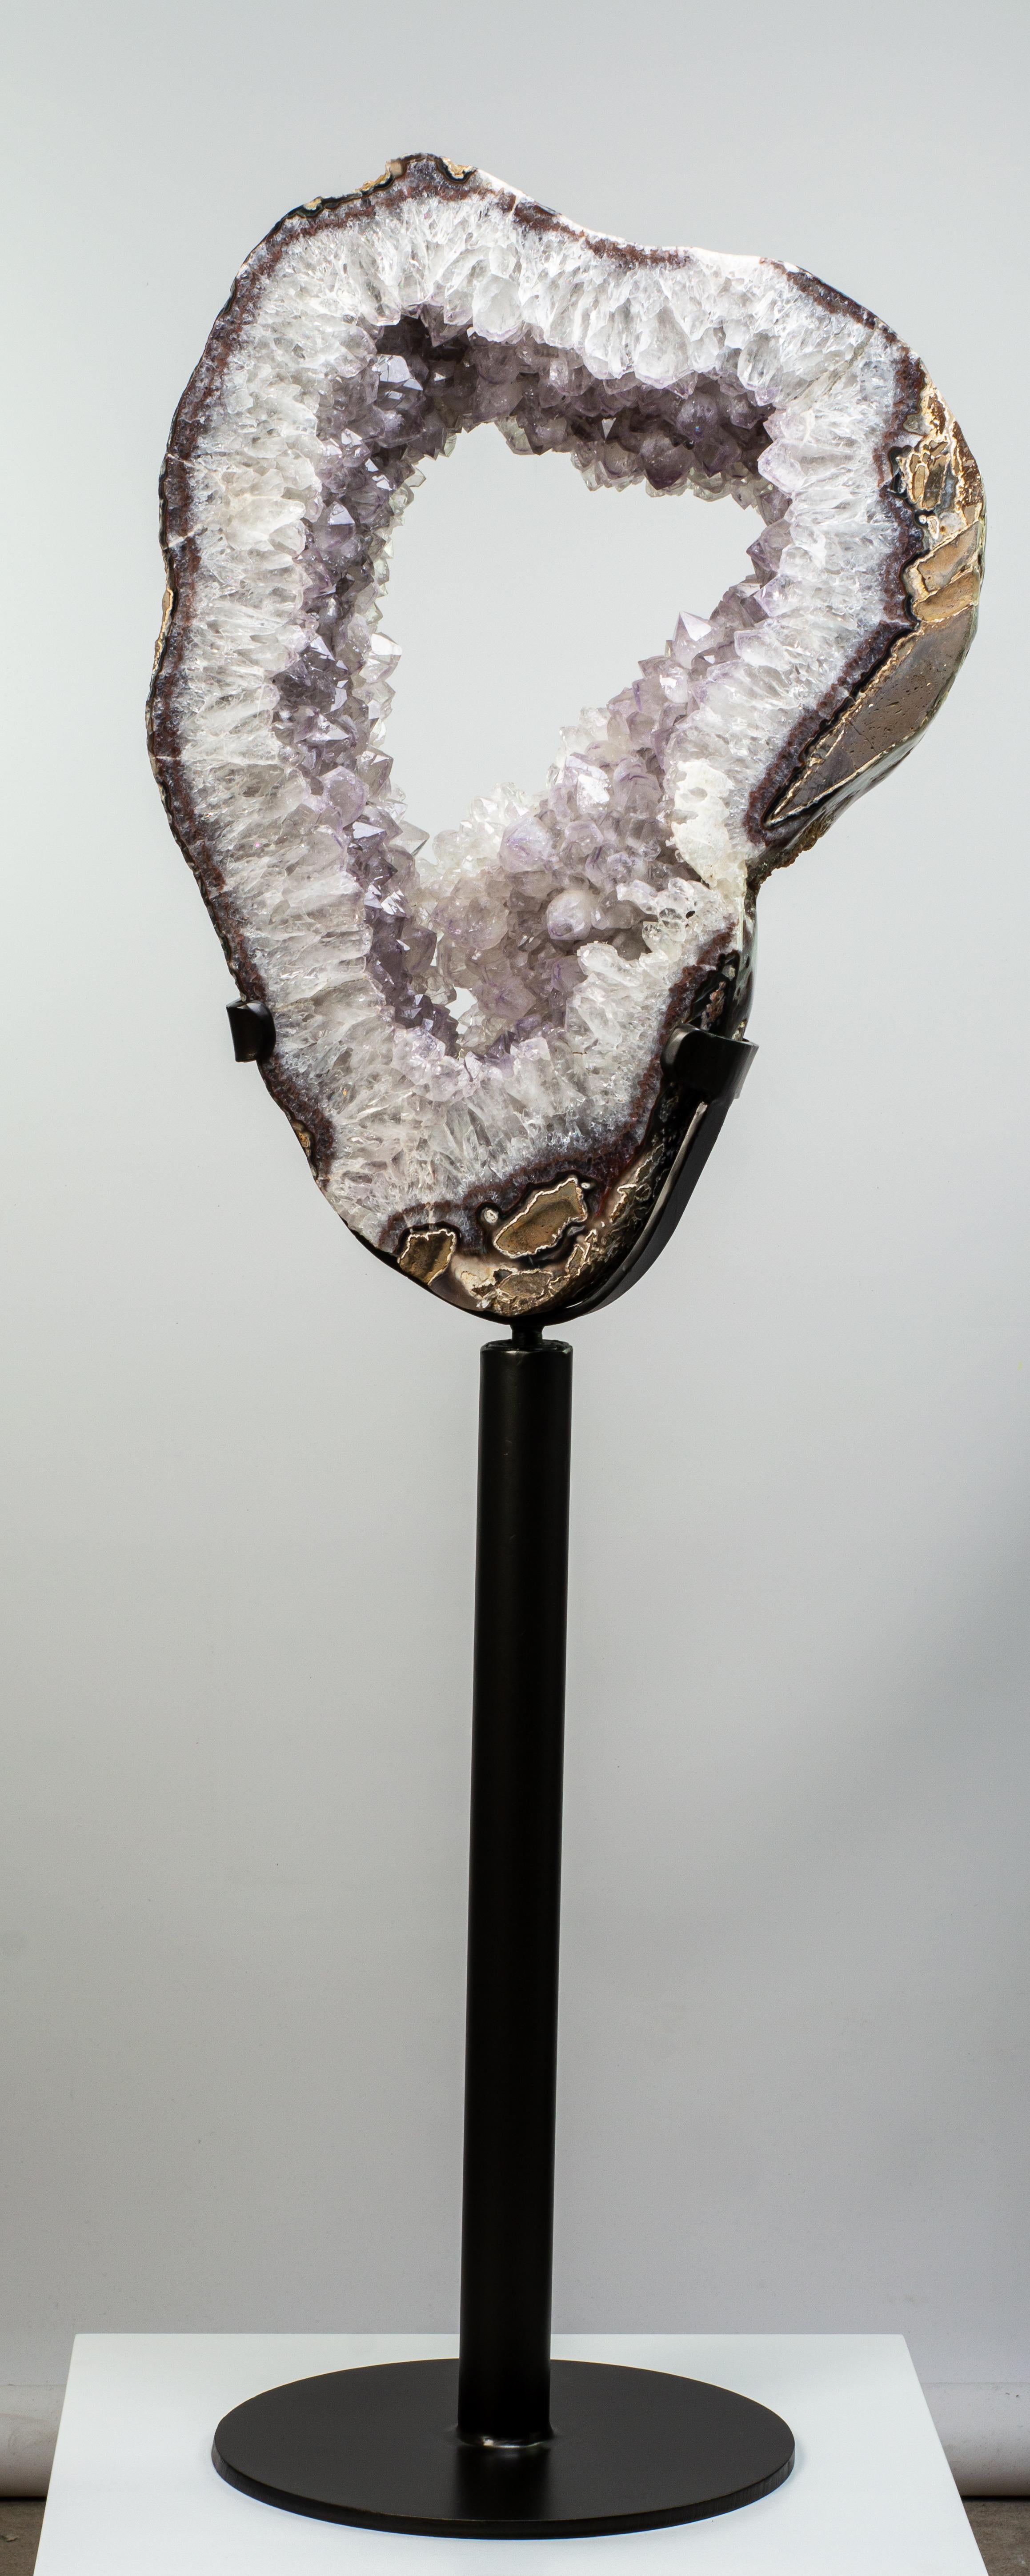 Expertly cut from a large geode, this slice preserves large lilac crystals of amethystine quartz, bordered by a thin agate layer and a rough basalt exterior.

This piece was legally and ethically sourced directly in the prestigious mines of